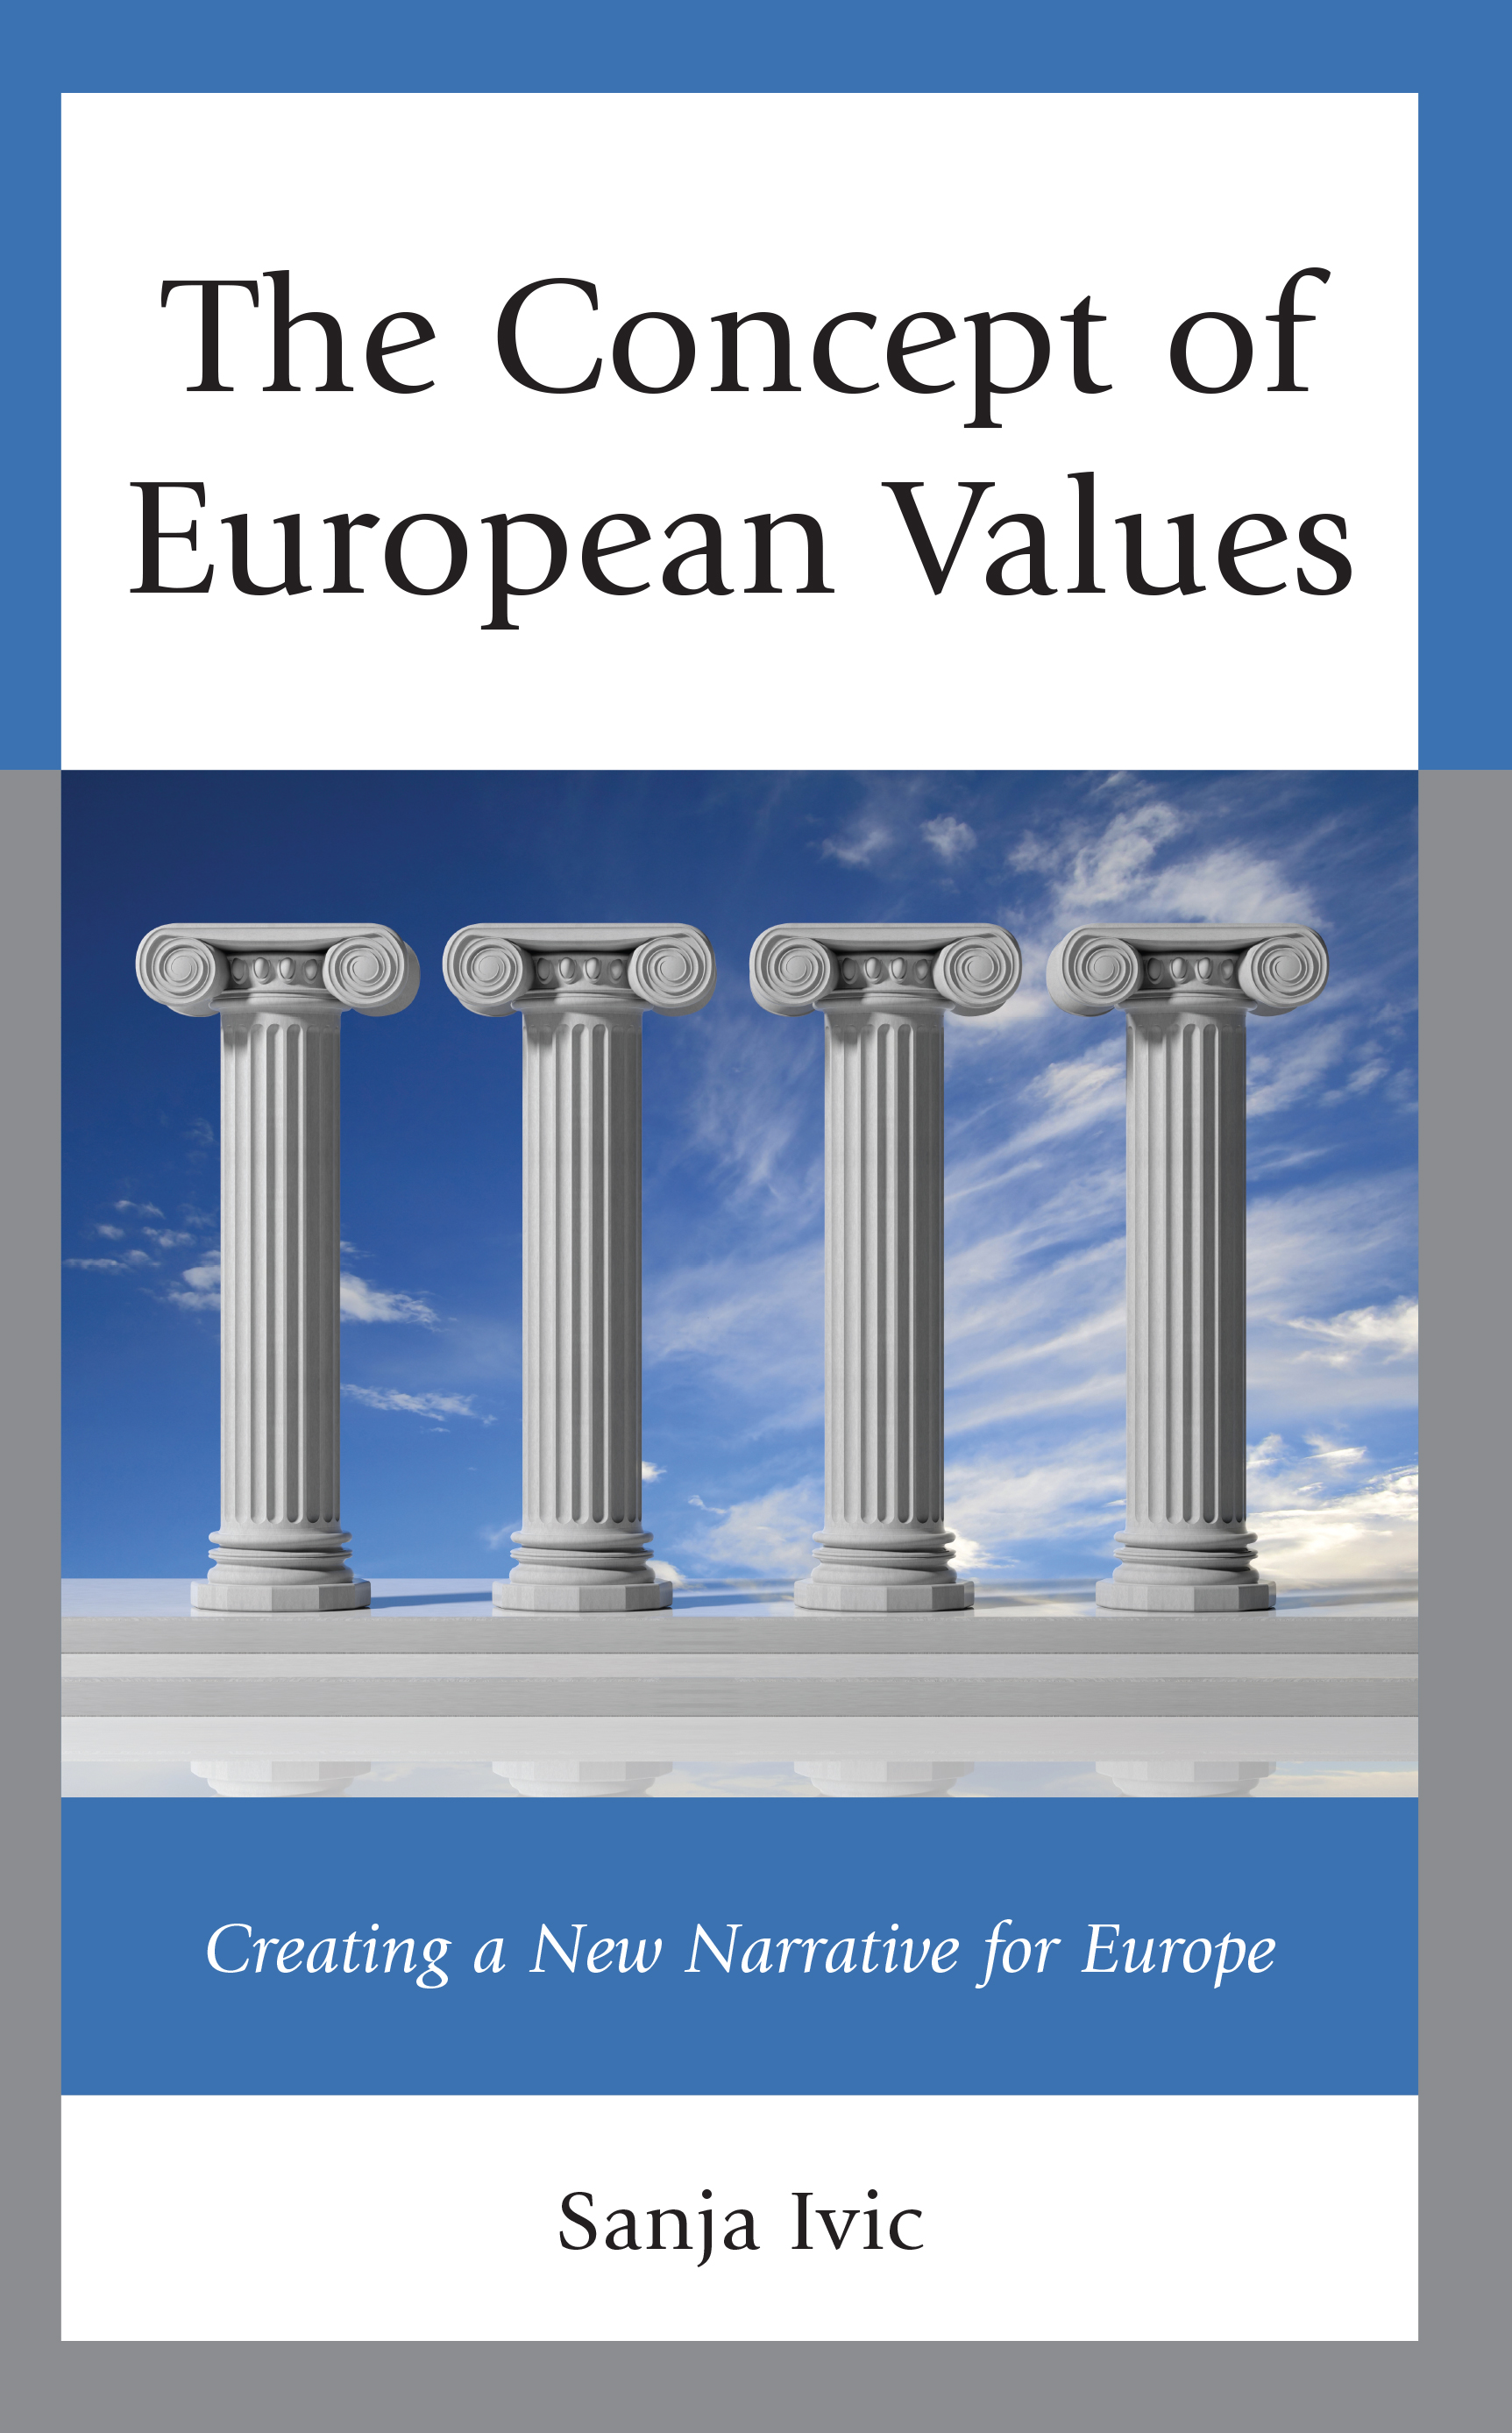 The Concept of European Values: Creating a New Narrative for Europe